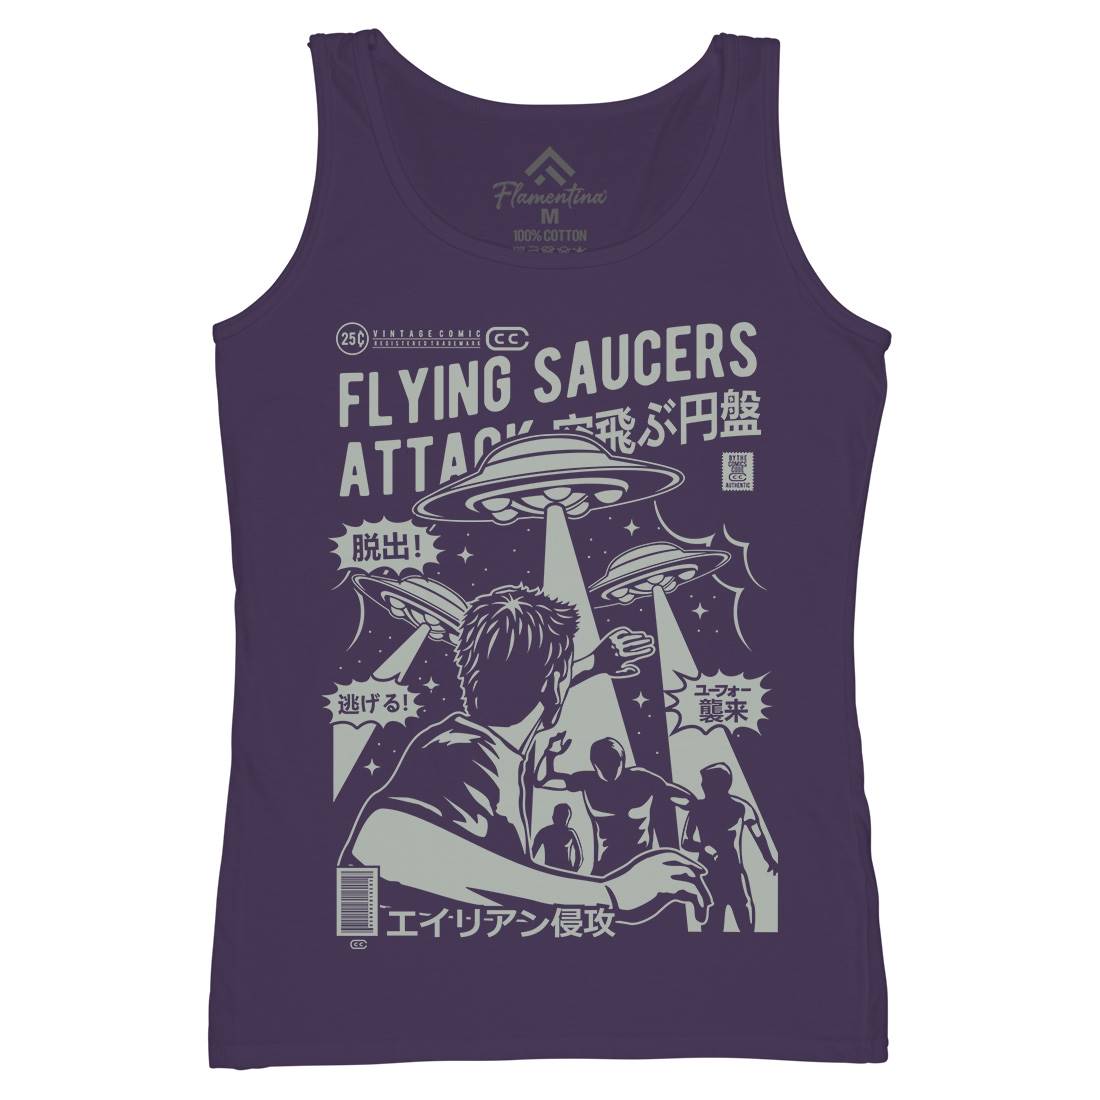 Flying Saucers Womens Organic Tank Top Vest Space A230